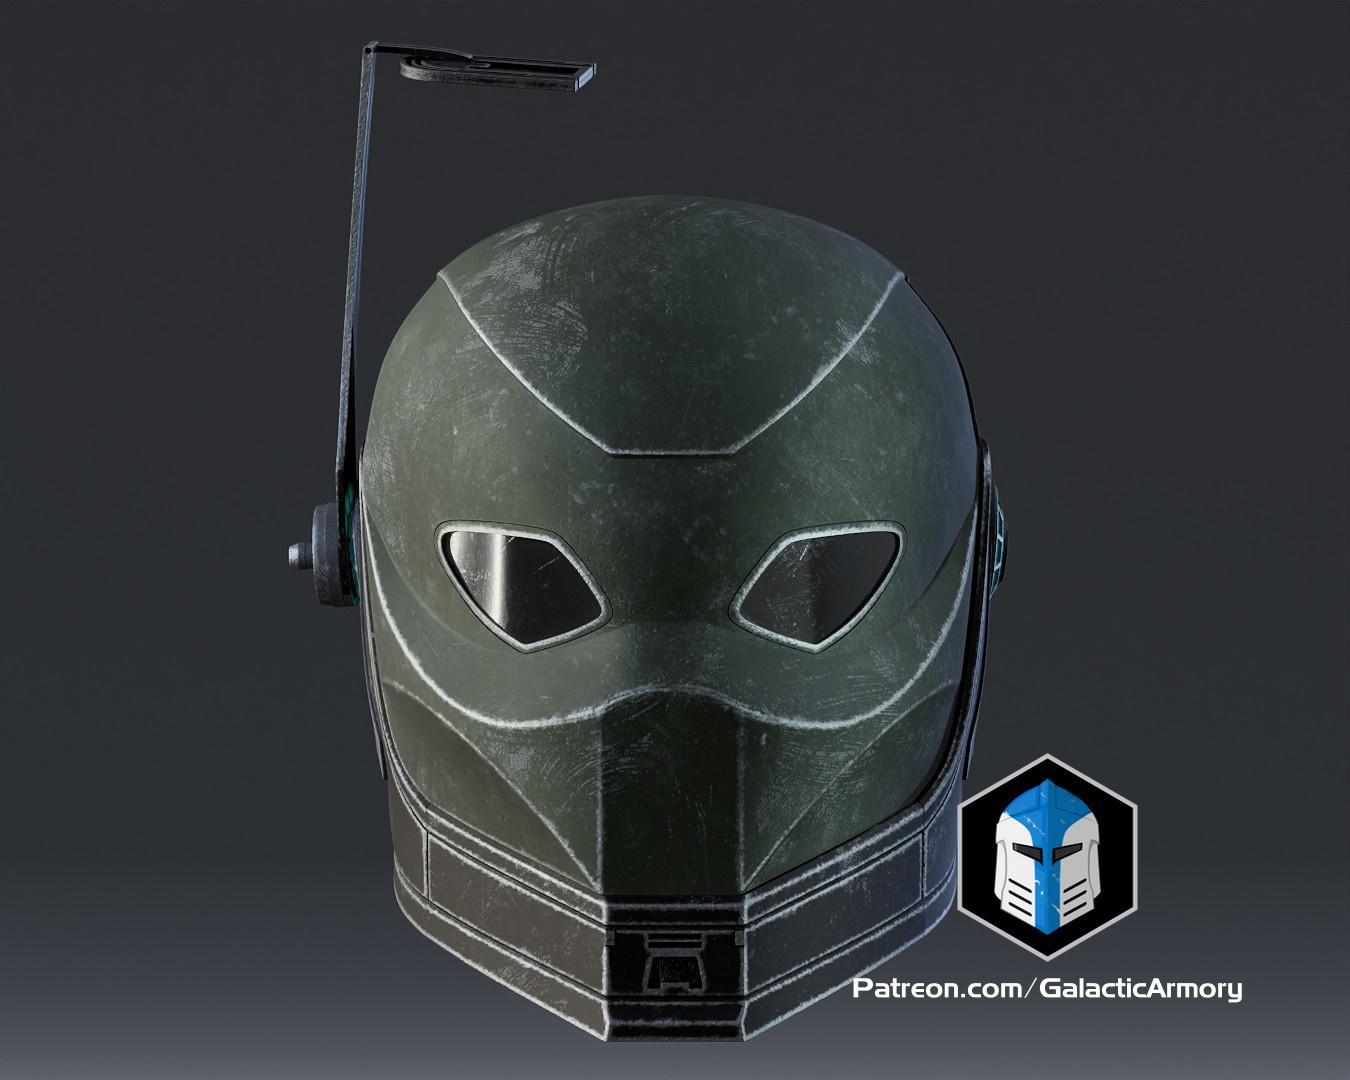 The Clone Assassin helmet has been upgraded and added to the Specialist rewards!